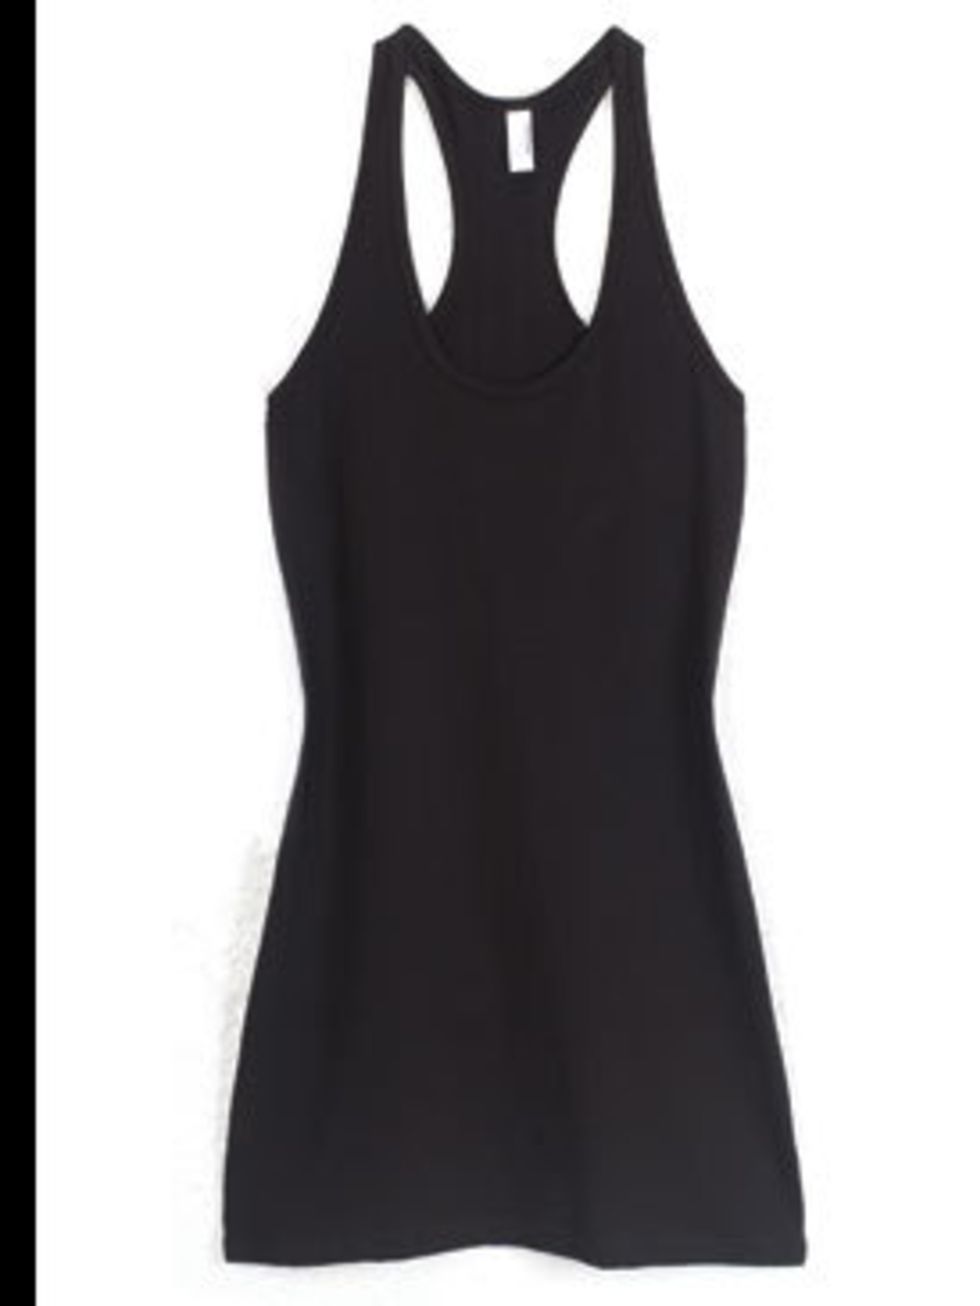 <p>Black racer back t-shirt dress, £20, by <a href="http://store.americanapparel.co.uk/2335.html">American Apparel</a></p>